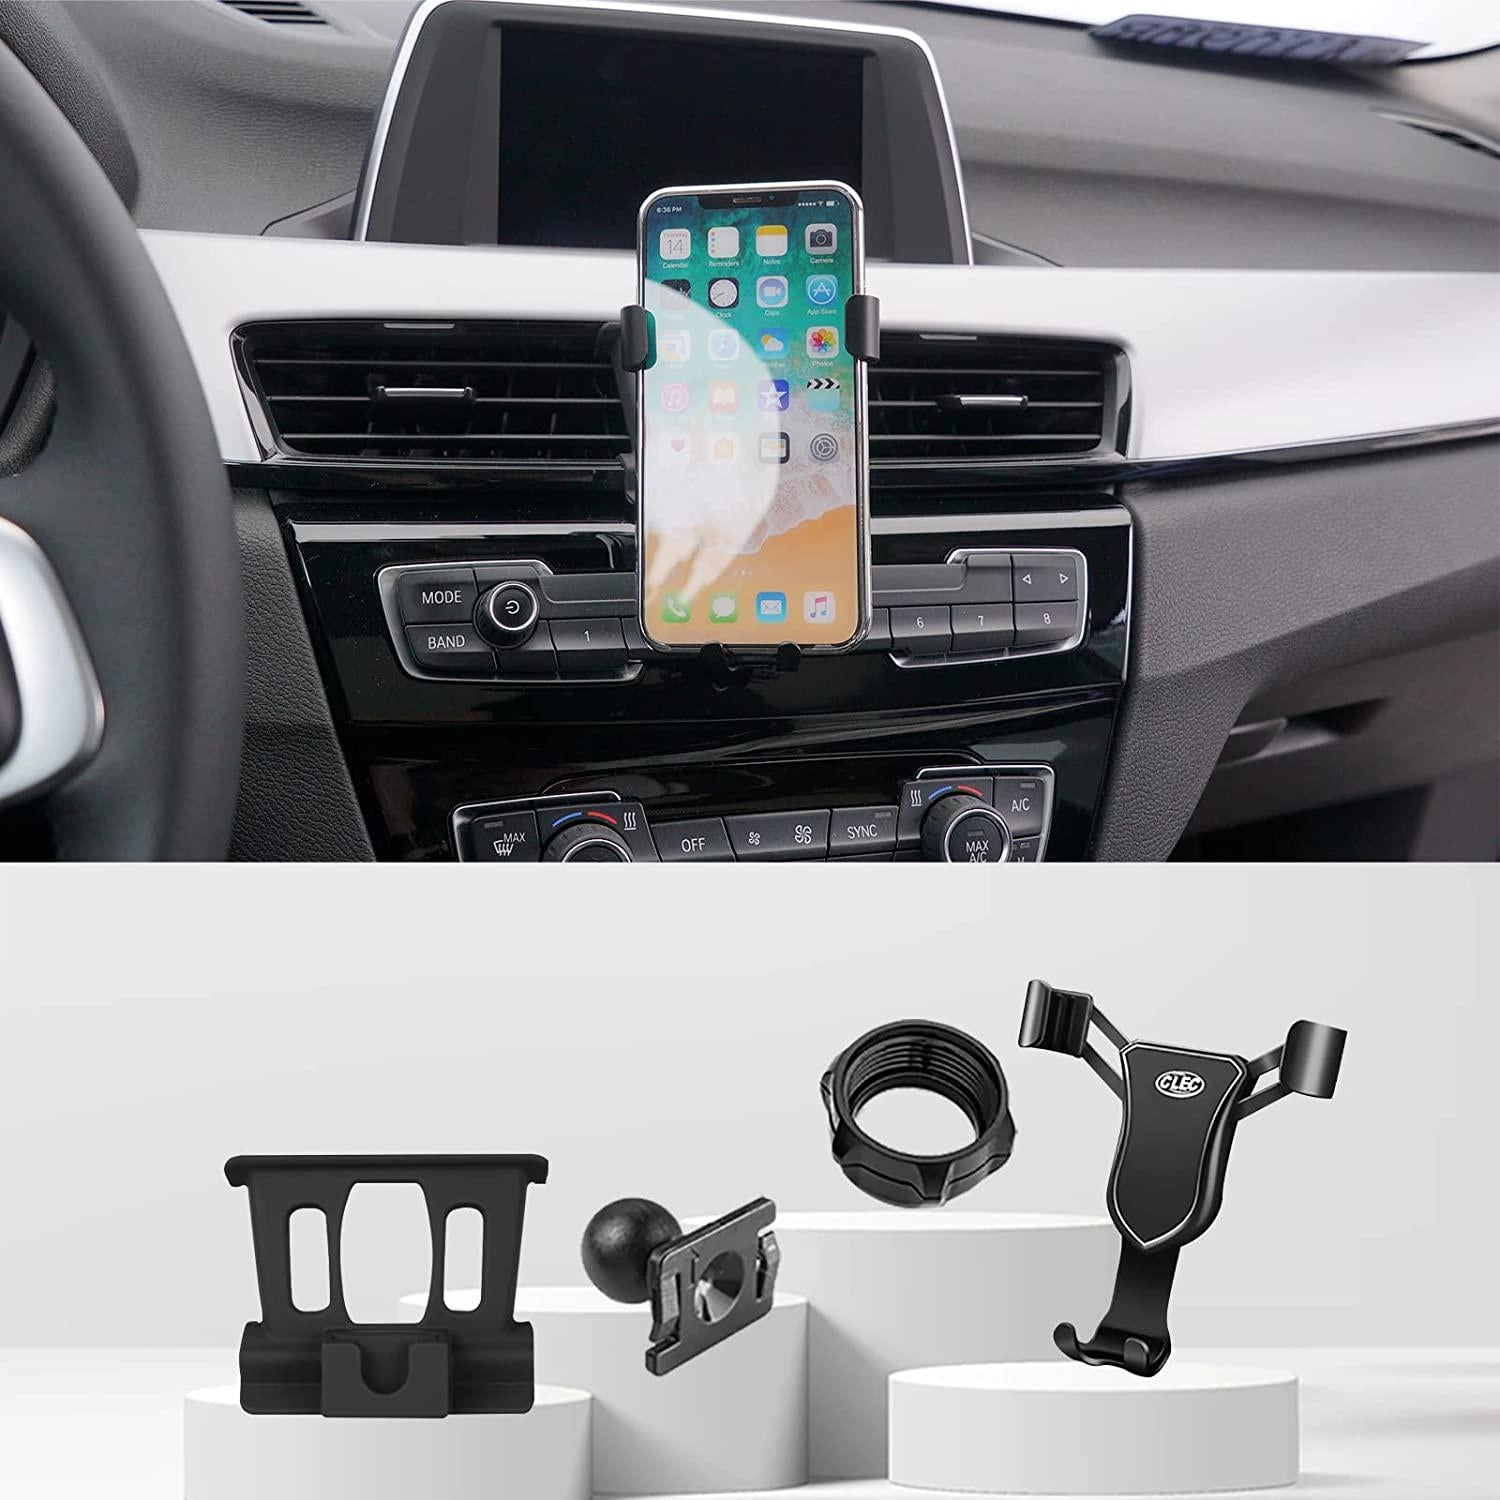 KUCOK, Kucok Phone Holder Fit for BMW X1 2016-2021 BMW X2 2018-2022,Air Car Vent Car Phone Mount Fit for BMW,Dashboard Panel Cell Phone Mount Fit for X1 X2 One-Handed Operation 4-6.7 Inch Cell Phone